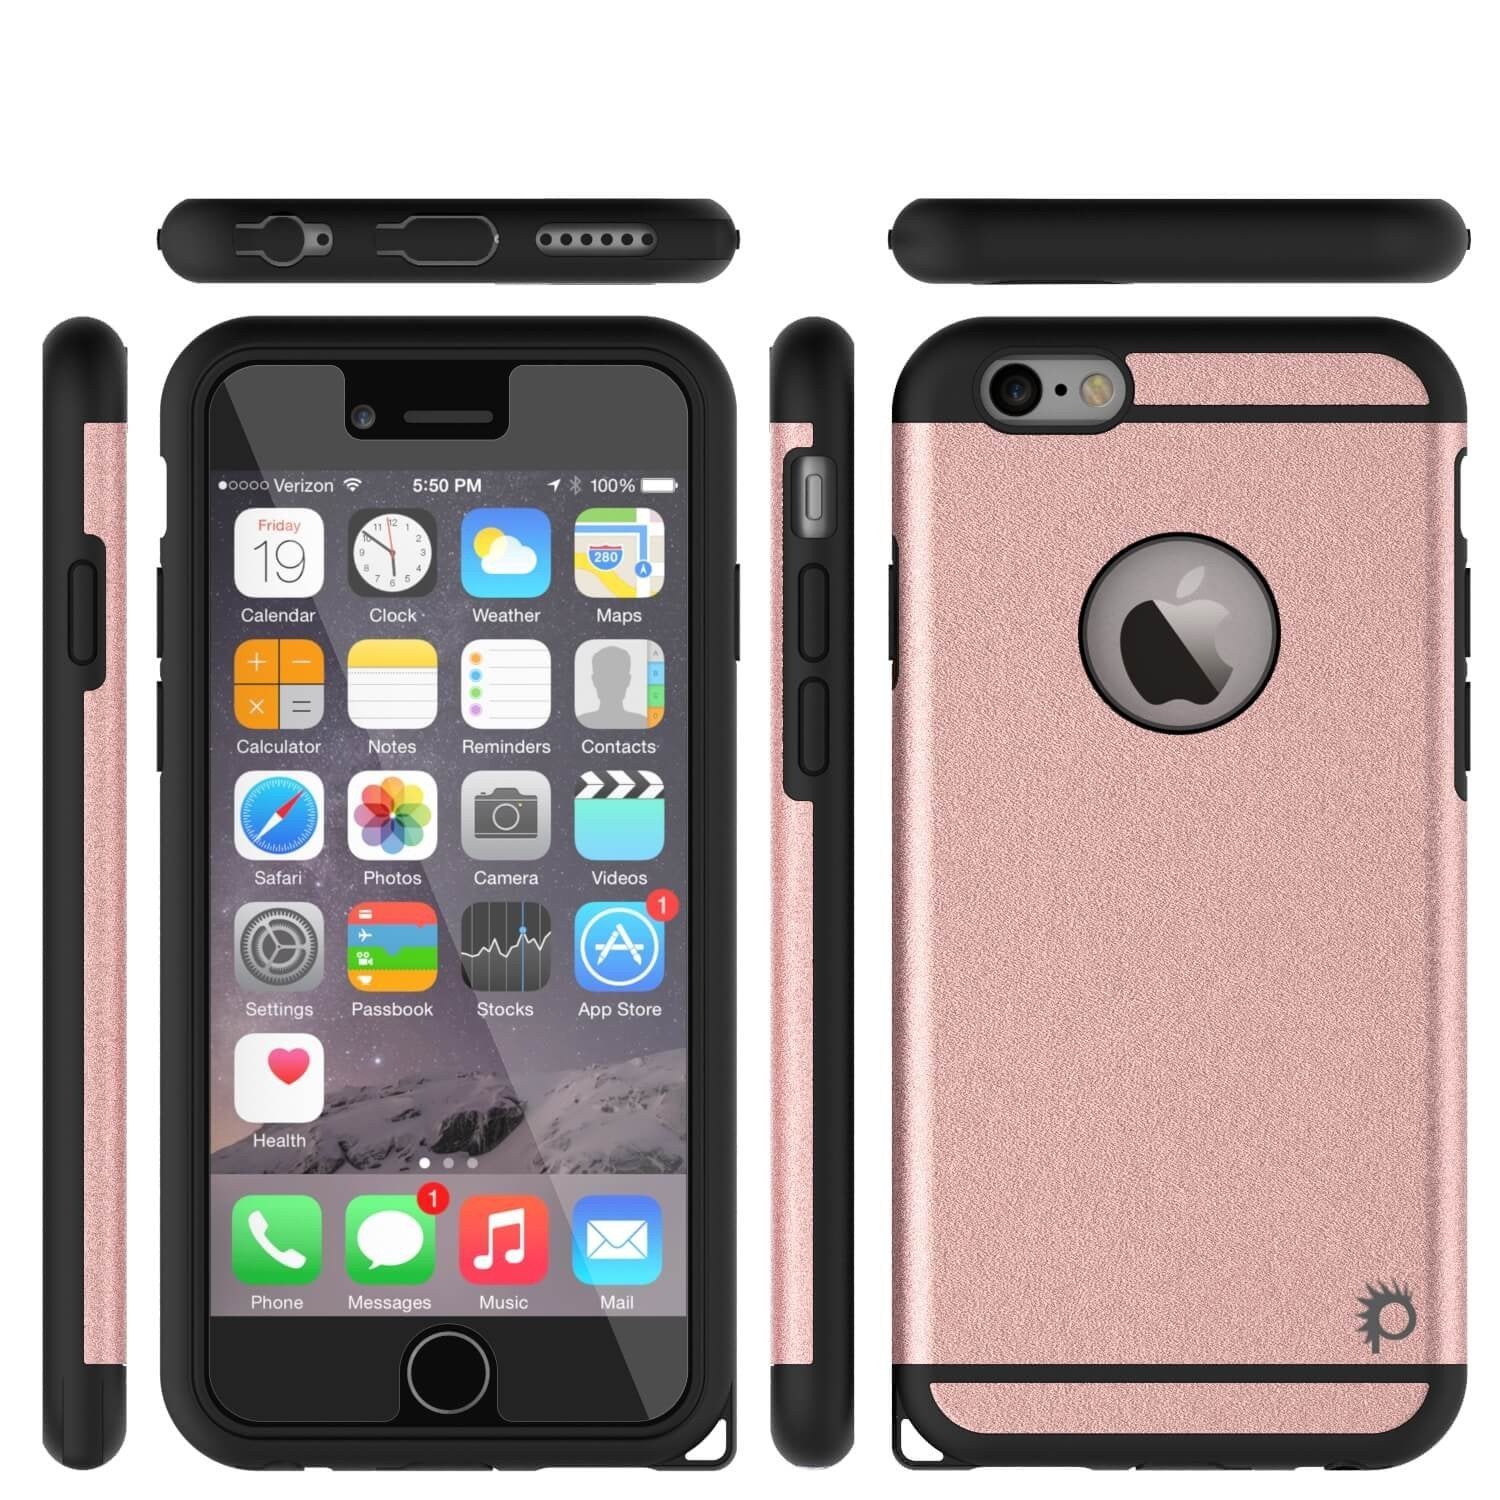 iPhone 5s/5 Case PunkCase Galactic pink Series Slim w/ Tempered Glass | Lifetime Warranty